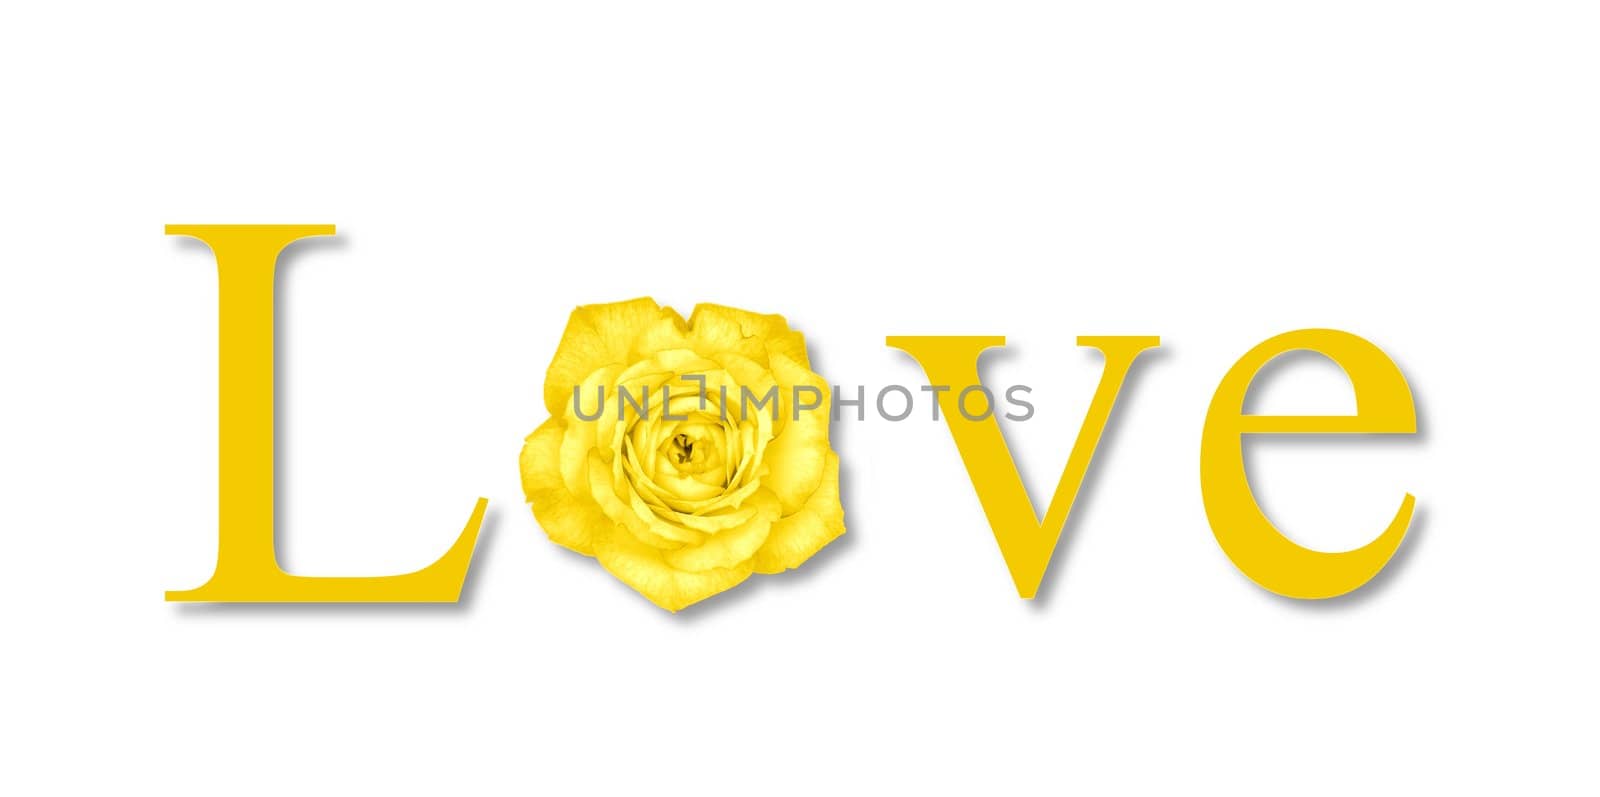 The text love with a flower on white background.